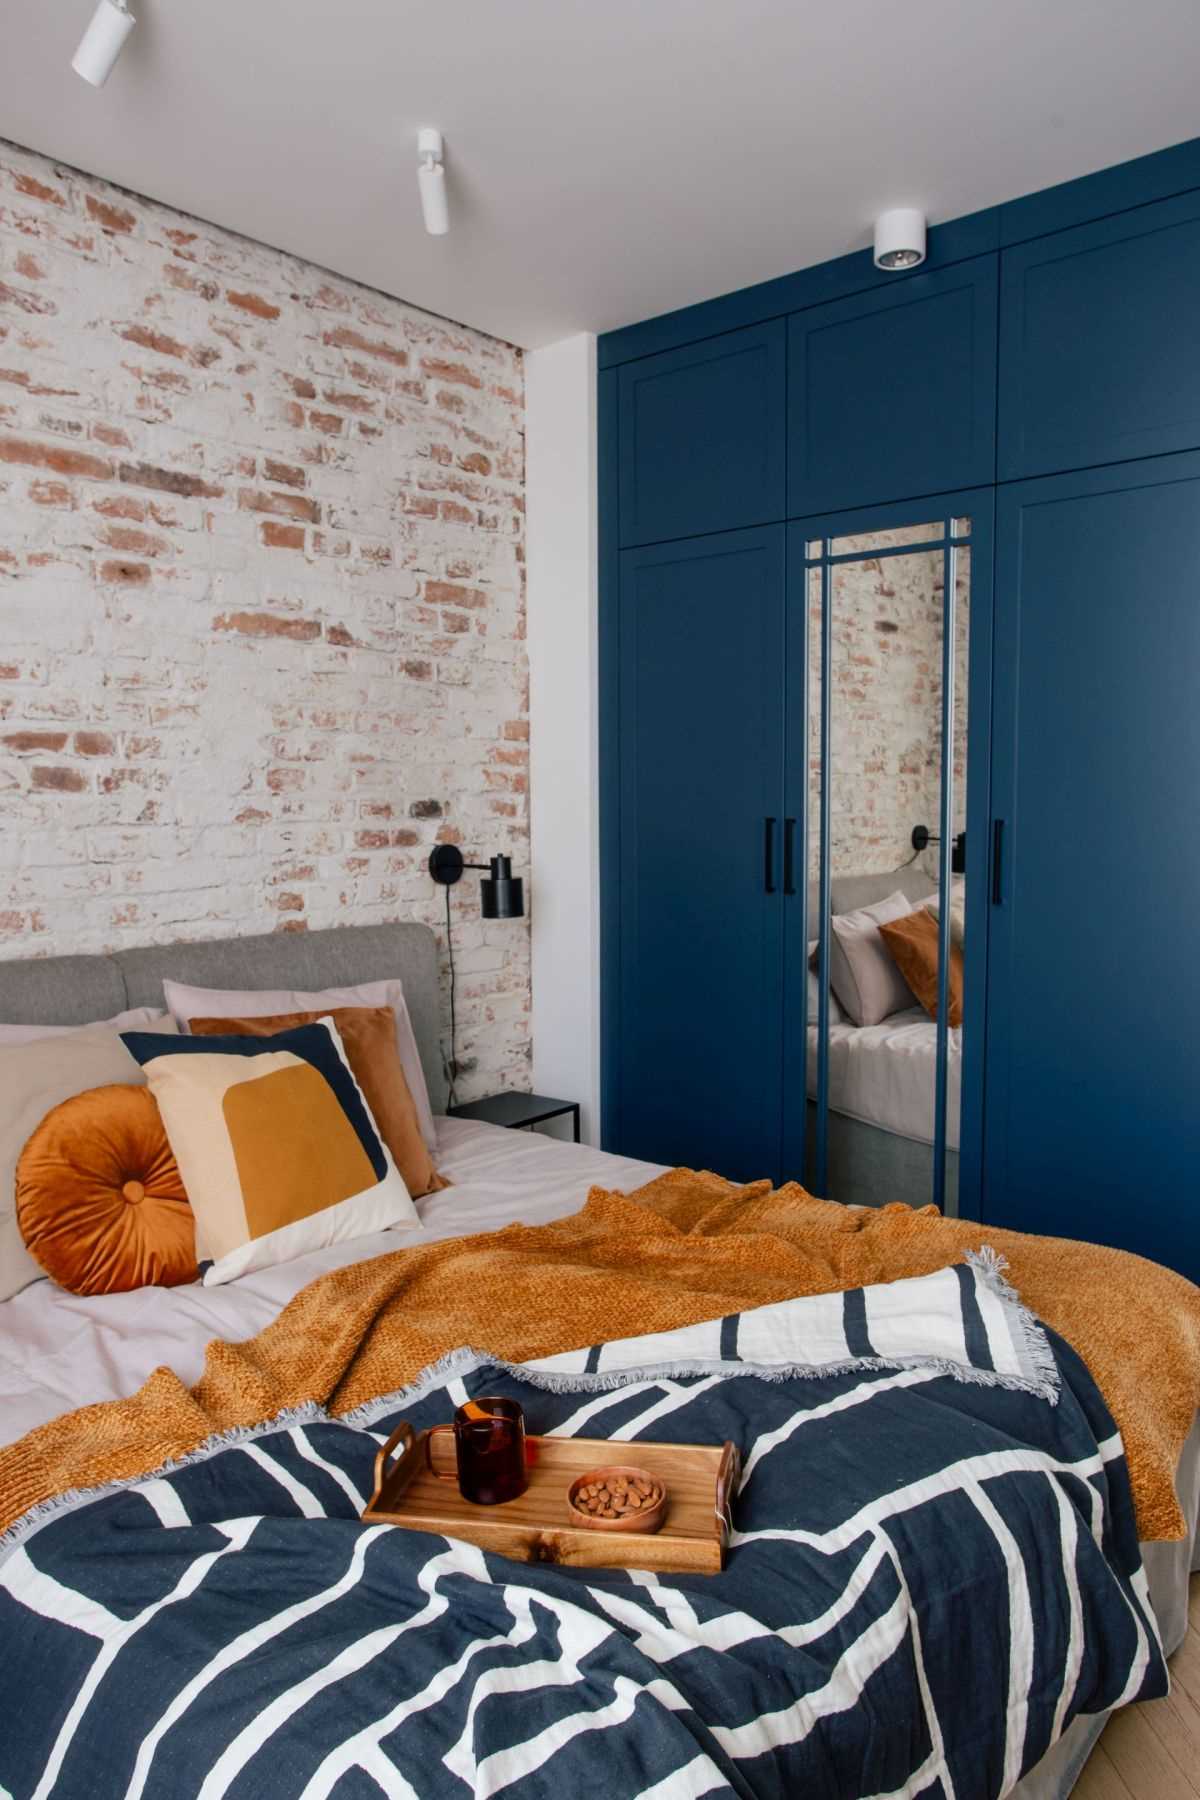 In this bedroom, the brick wall is structural and was exposed to act as an accent wall. Deep blue cabinetry has been built around a mirror.